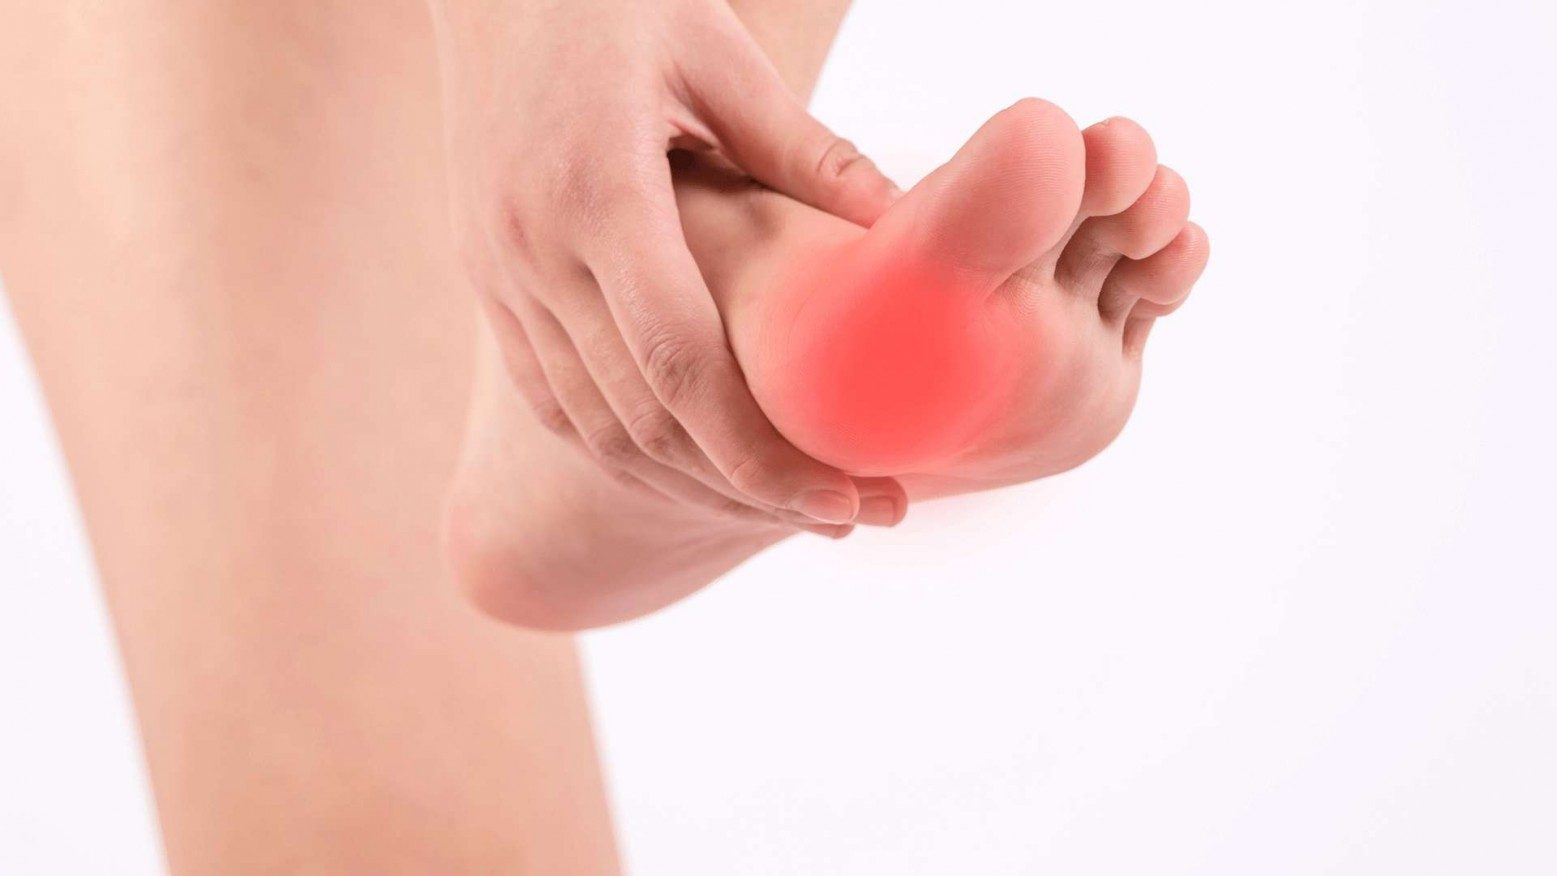 Ball of foot pain shown by a red indicator on someone's foot